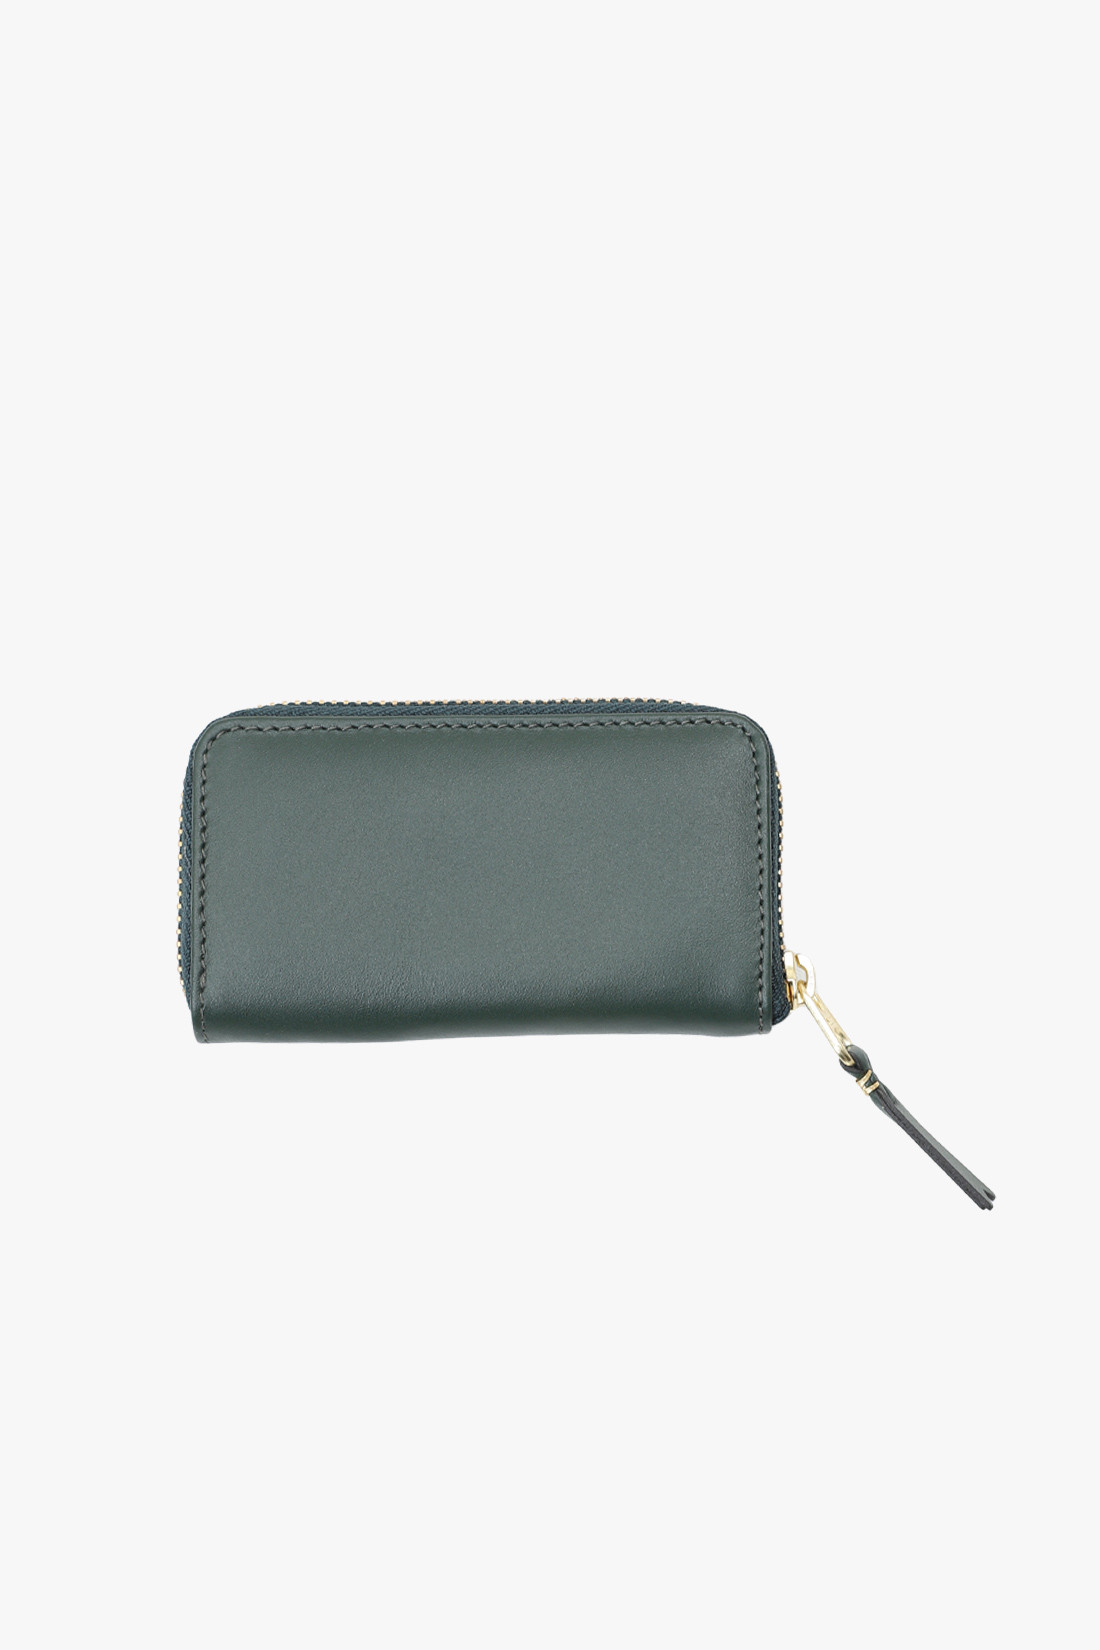 Classic leather line Bottle green